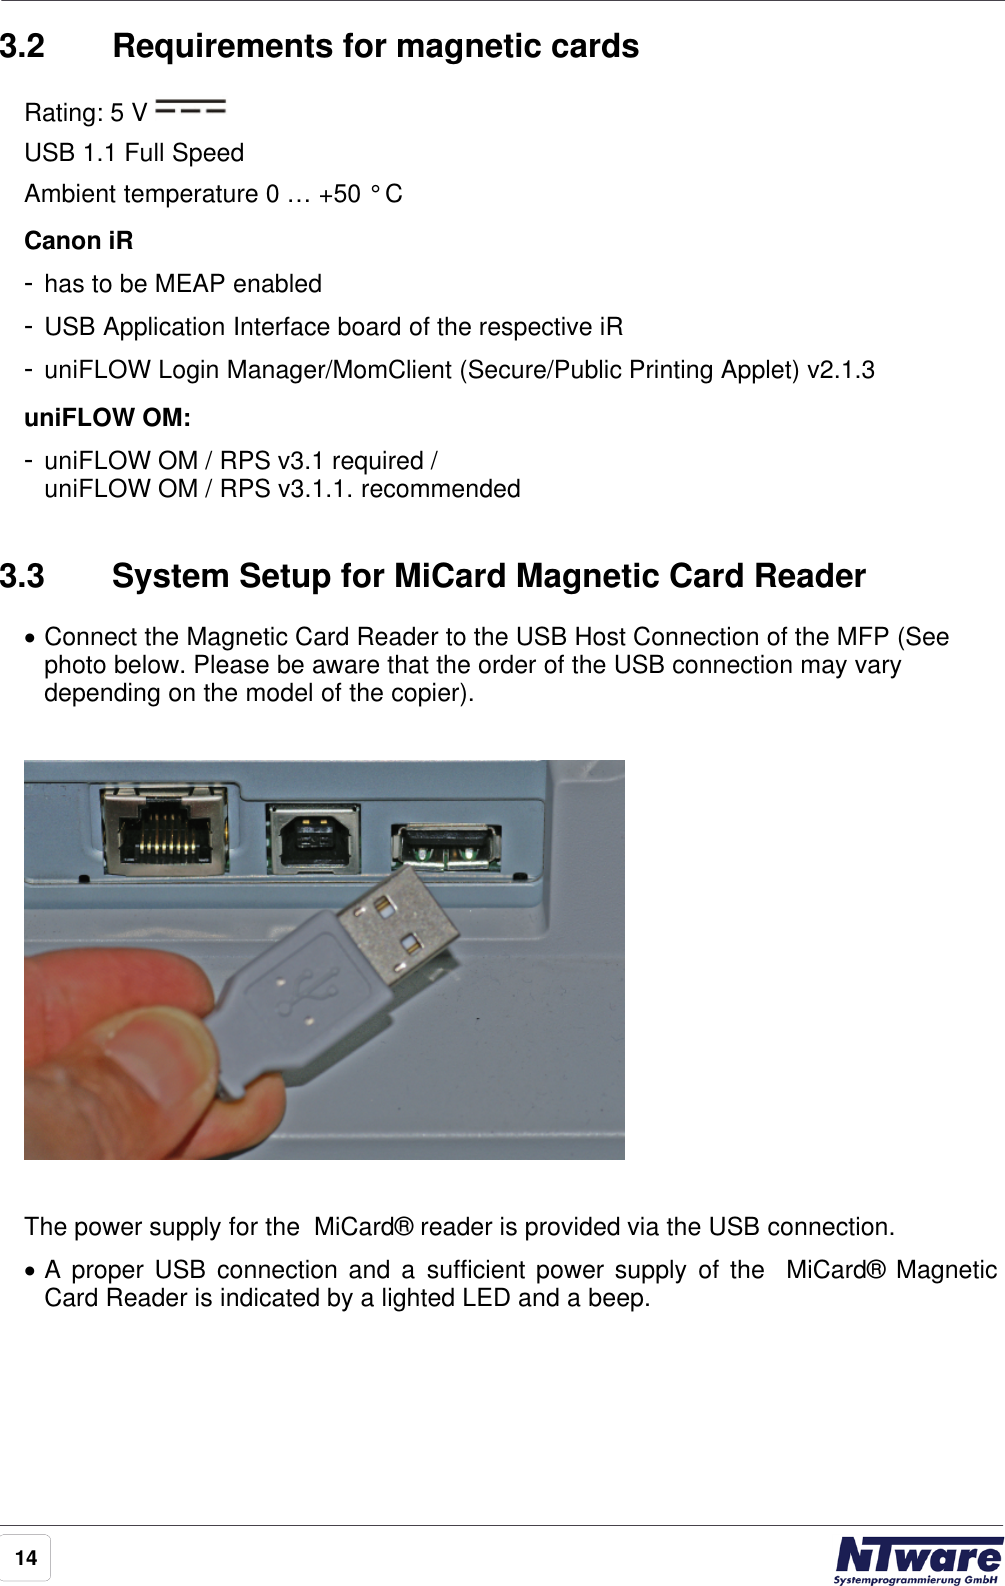 143.2 Requirements for magnetic cardsRating: 5 V USB 1.1 Full Speed Ambient temperature 0 … +50 ° CCanon iR-has to be MEAP enabled-USB Application Interface board of the respective iR-uniFLOW Login Manager/MomClient (Secure/Public Printing Applet) v2.1.3uniFLOW OM:-uniFLOW OM / RPS v3.1 required /uniFLOW OM / RPS v3.1.1. recommended3.3 System Setup for MiCard Magnetic Card Reader·Connect the Magnetic Card Reader to the USB Host Connection of the MFP (Seephoto below. Please be aware that the order of the USB connection may varydepending on the model of the copier).The power supply for the  MiCard® reader is provided via the USB connection.·A proper USB connection and  a  sufficient power supply of the  MiCard®  MagneticCard Reader is indicated by a lighted LED and a beep.